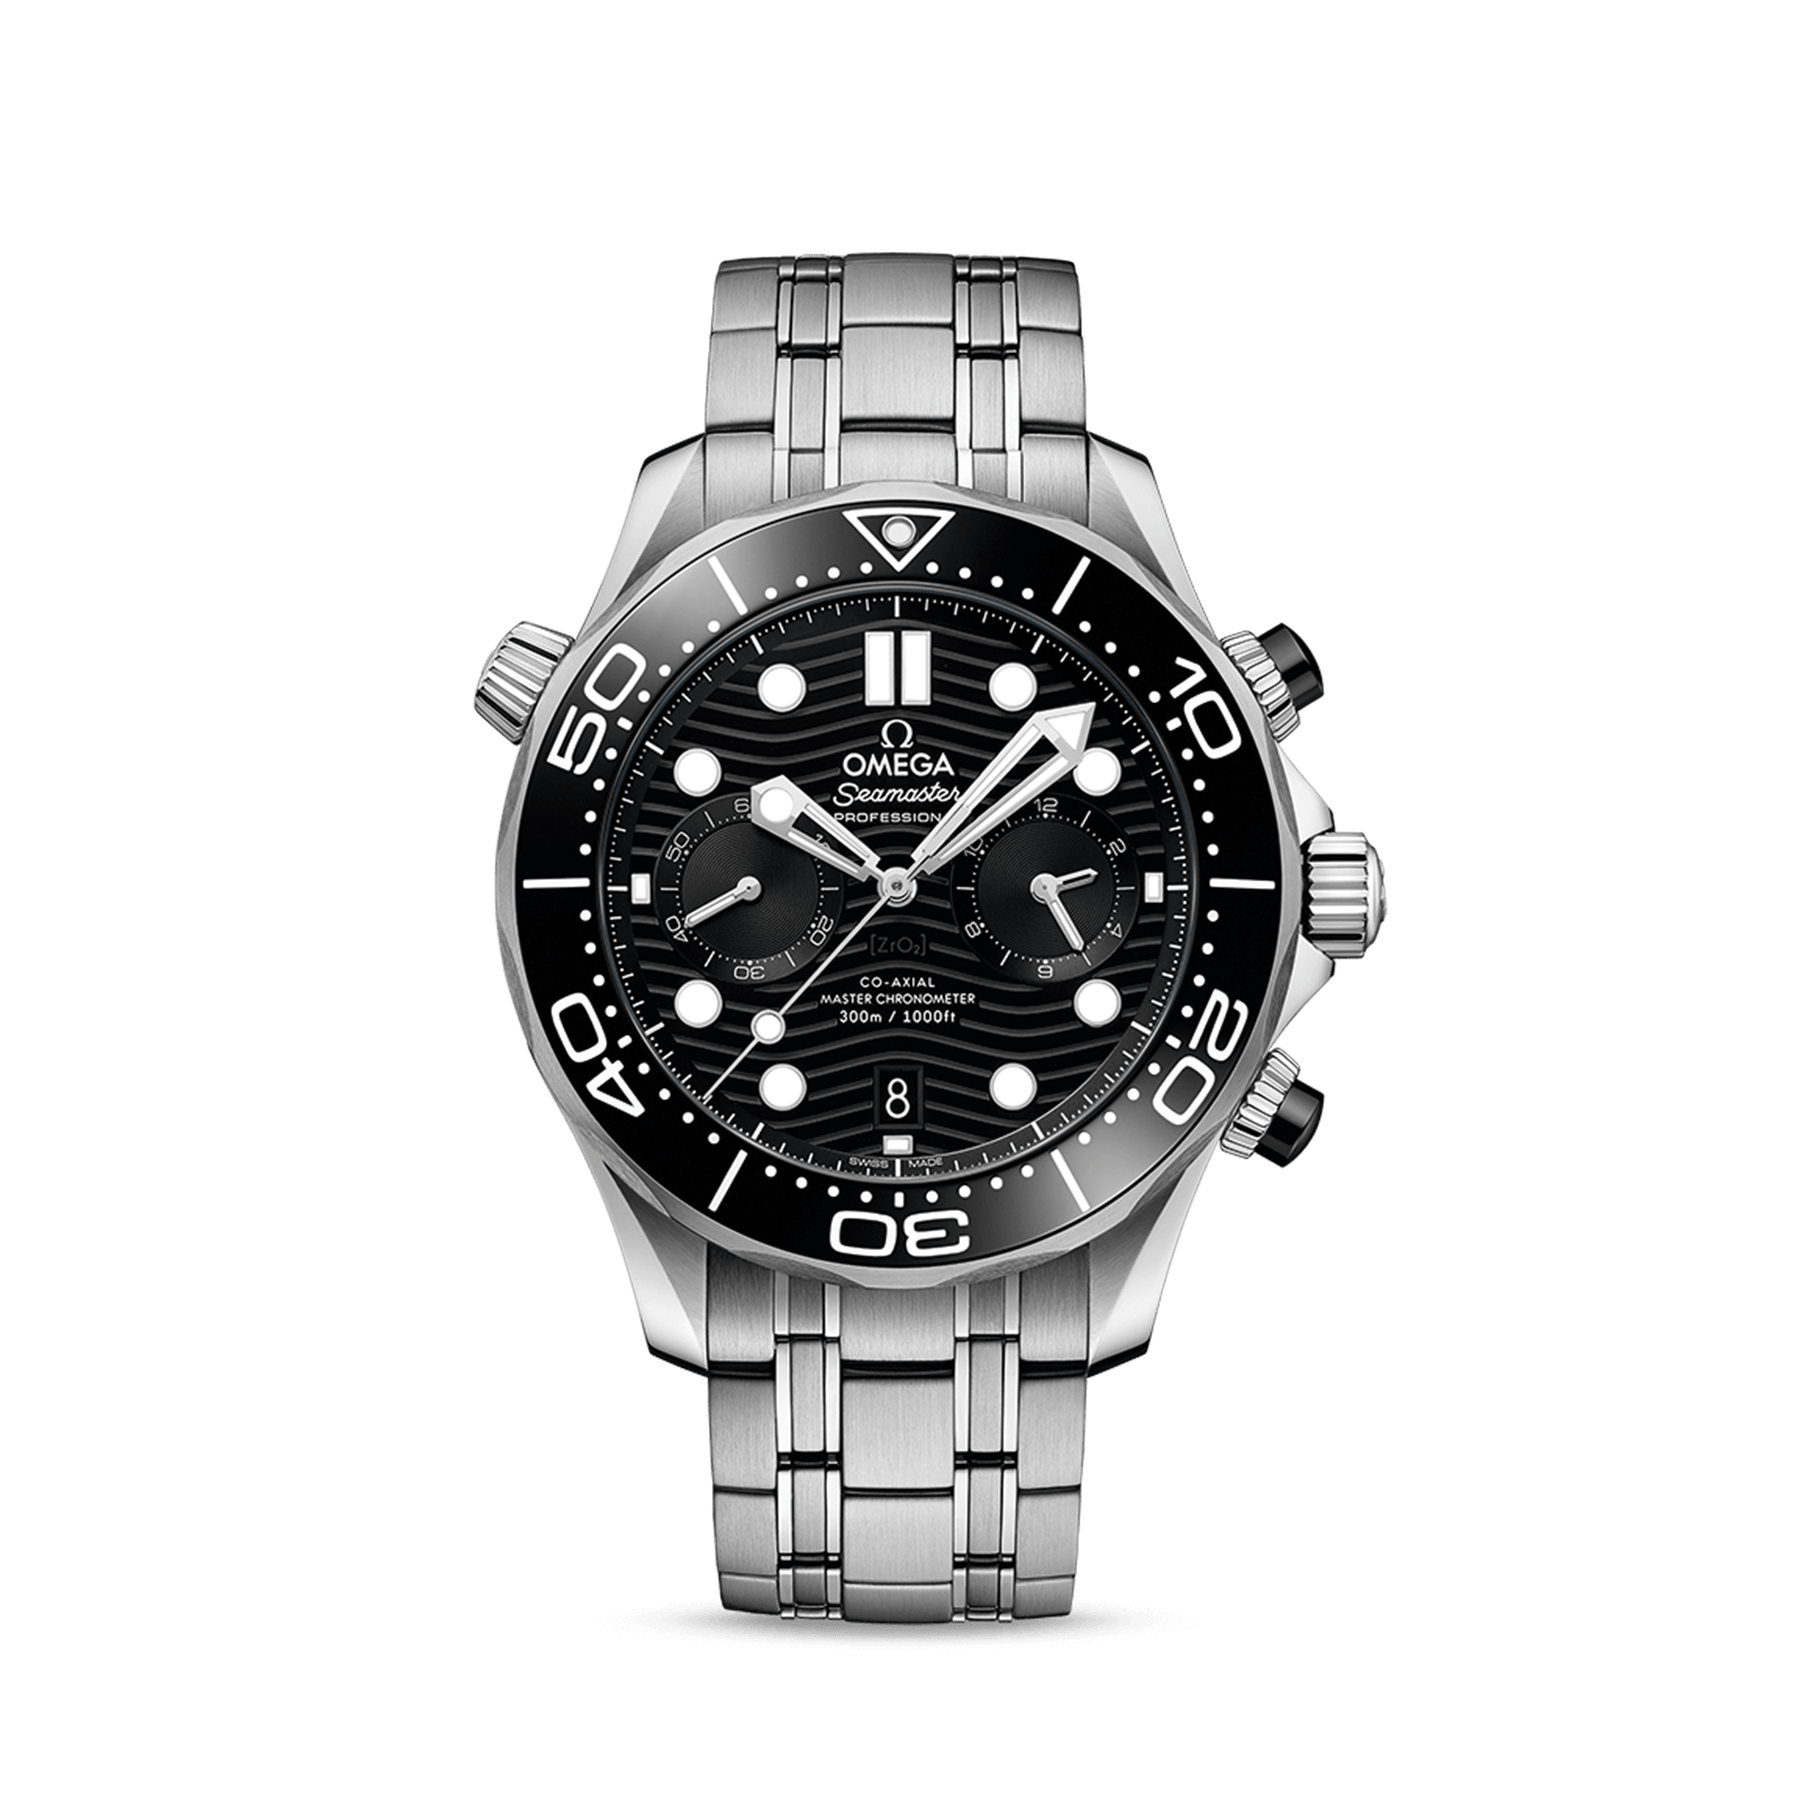 OMEGA Seamaster Diver 300M Co-Axial Master Chronometer Chronograph 44mm